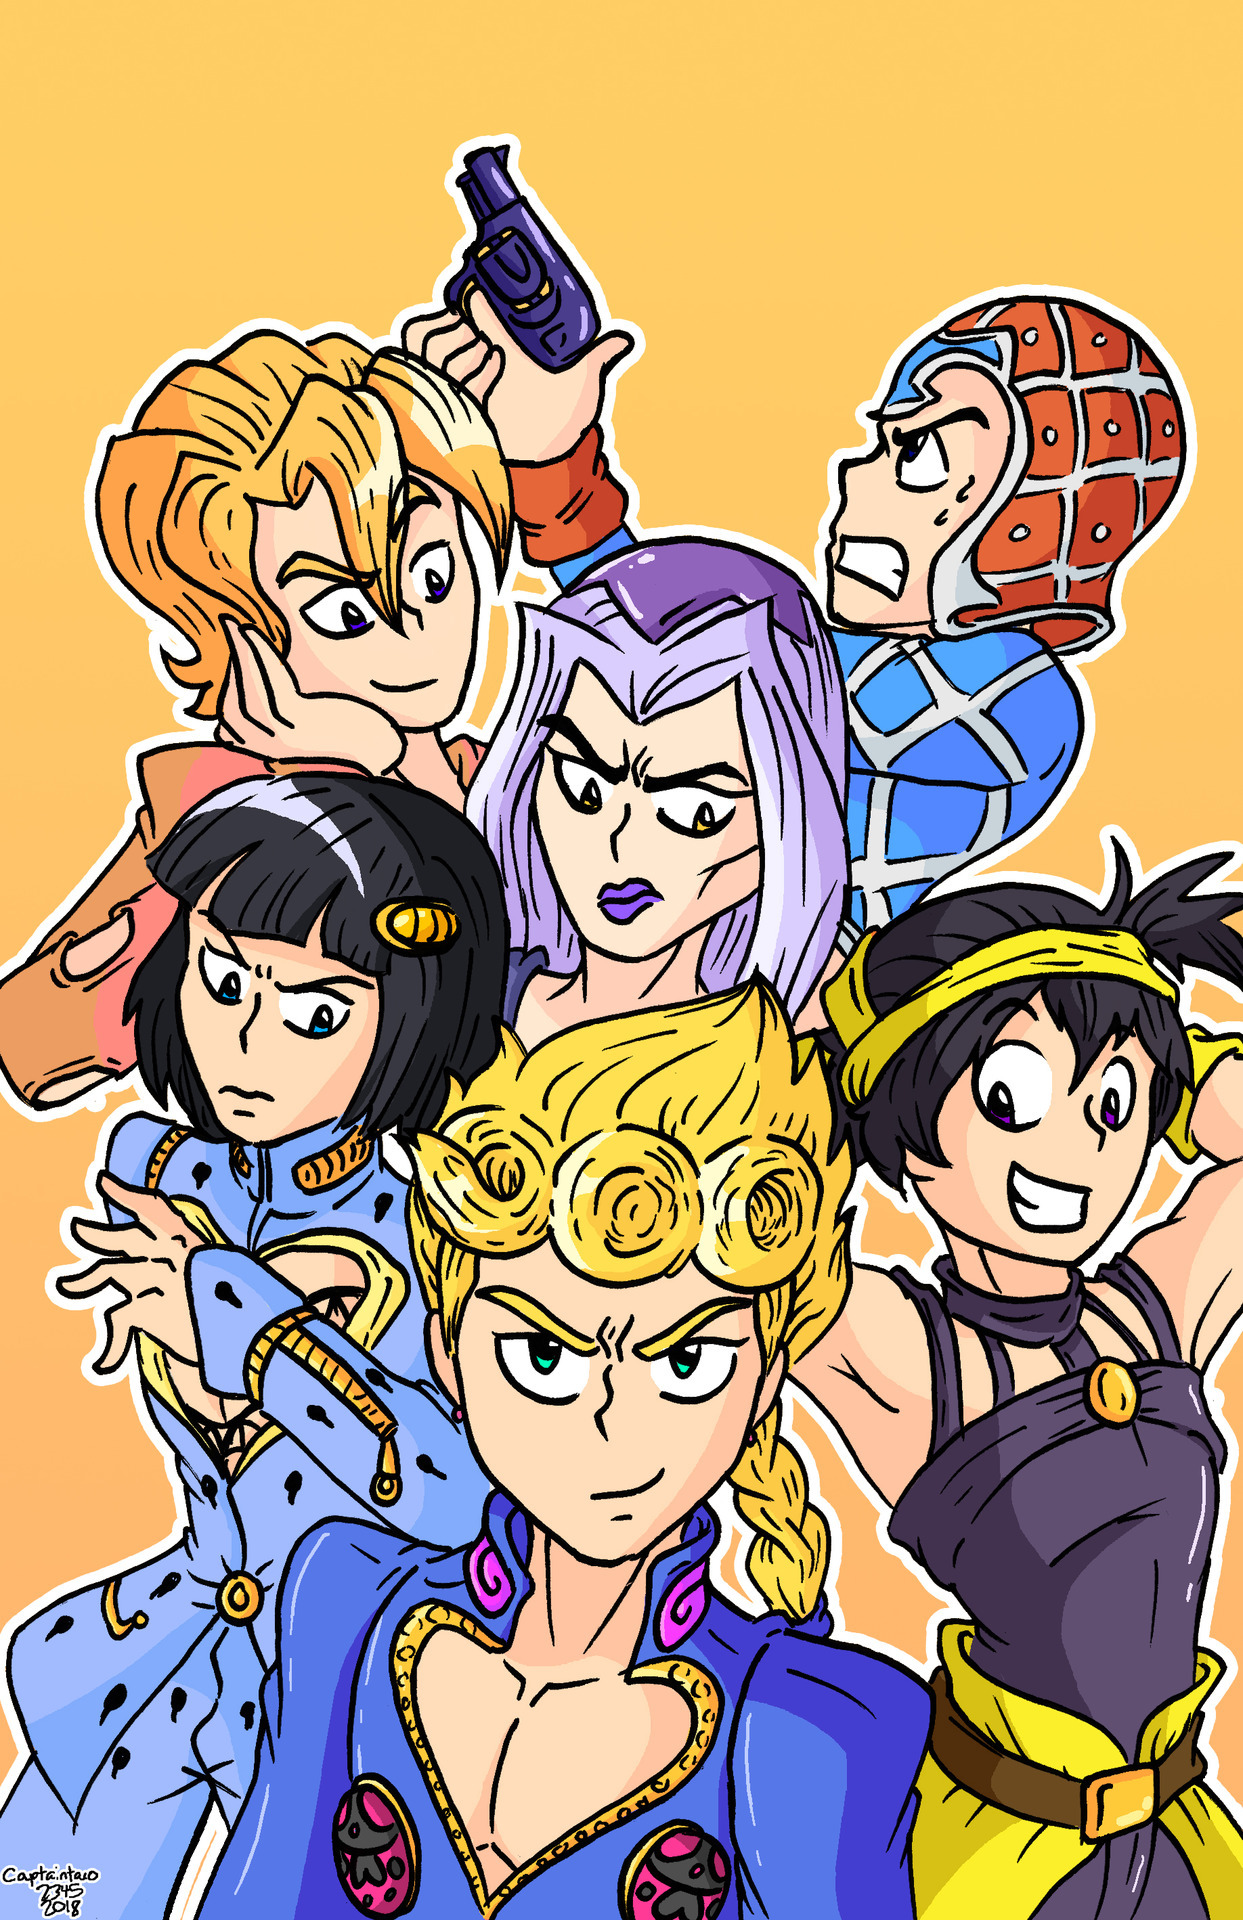 To celebrate the Vento Aureo anime coming out next month, I drew this poster of Passione.